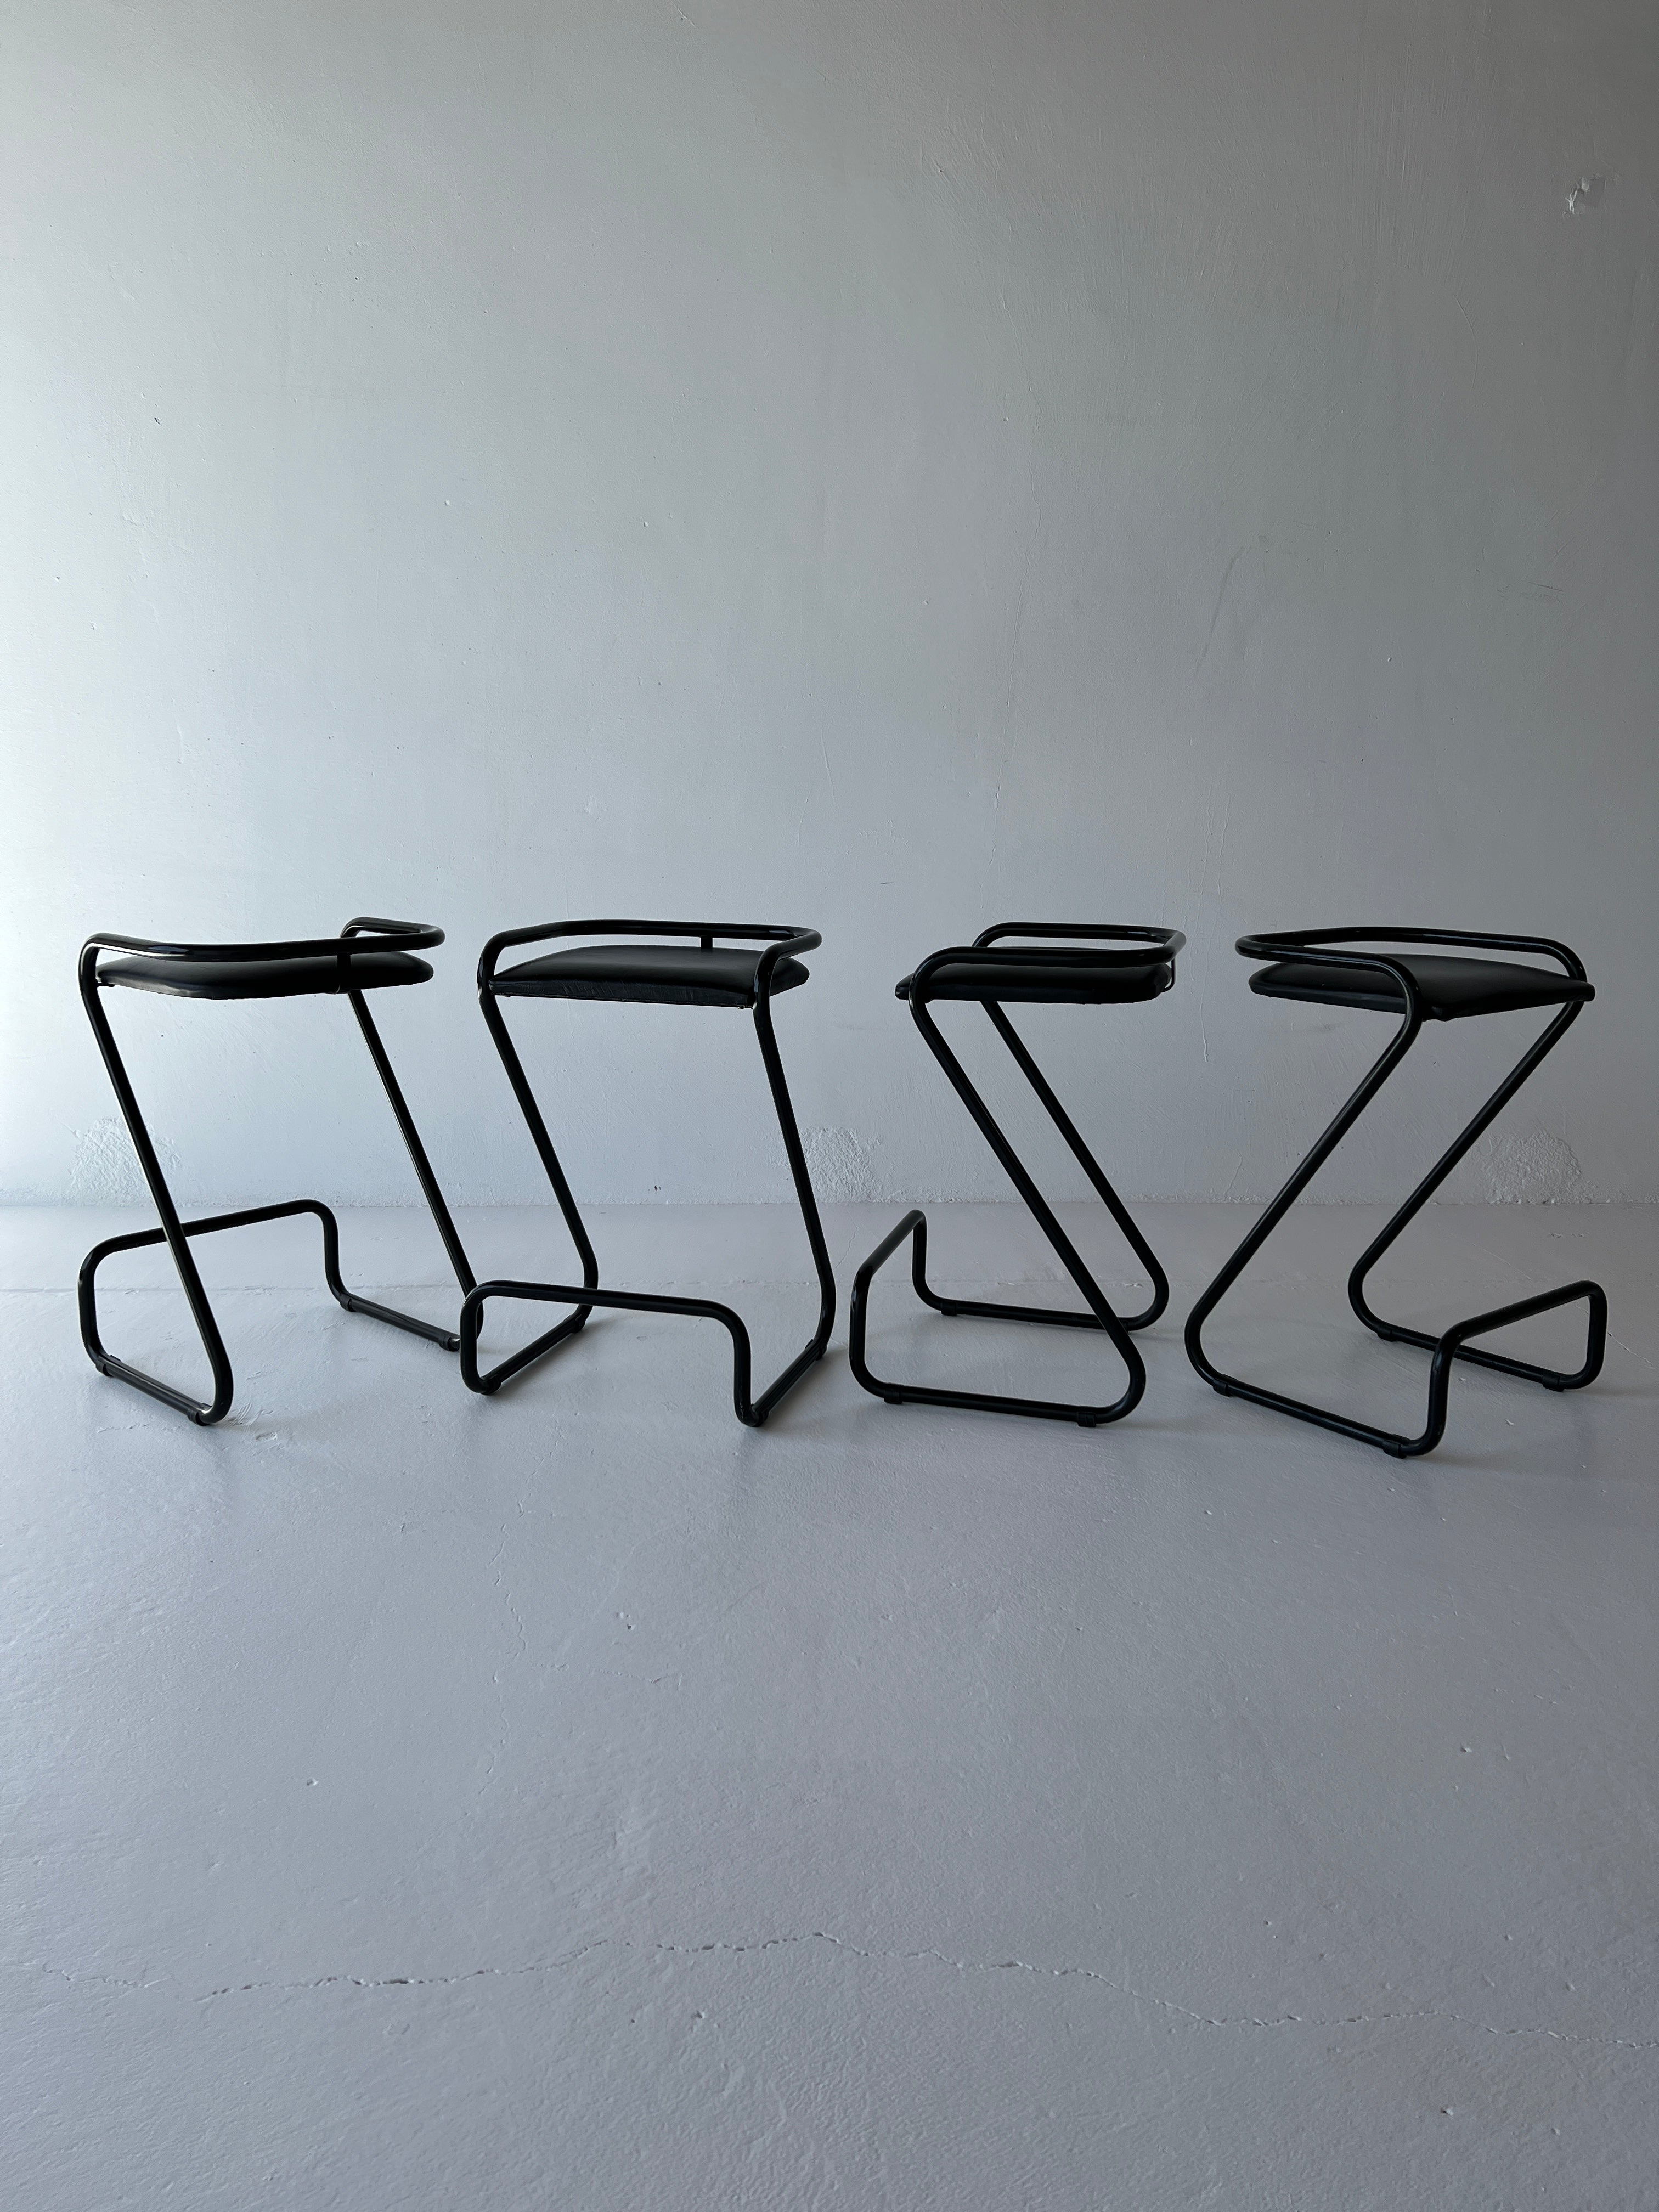 Charlotte Perriand Style Bar Stools